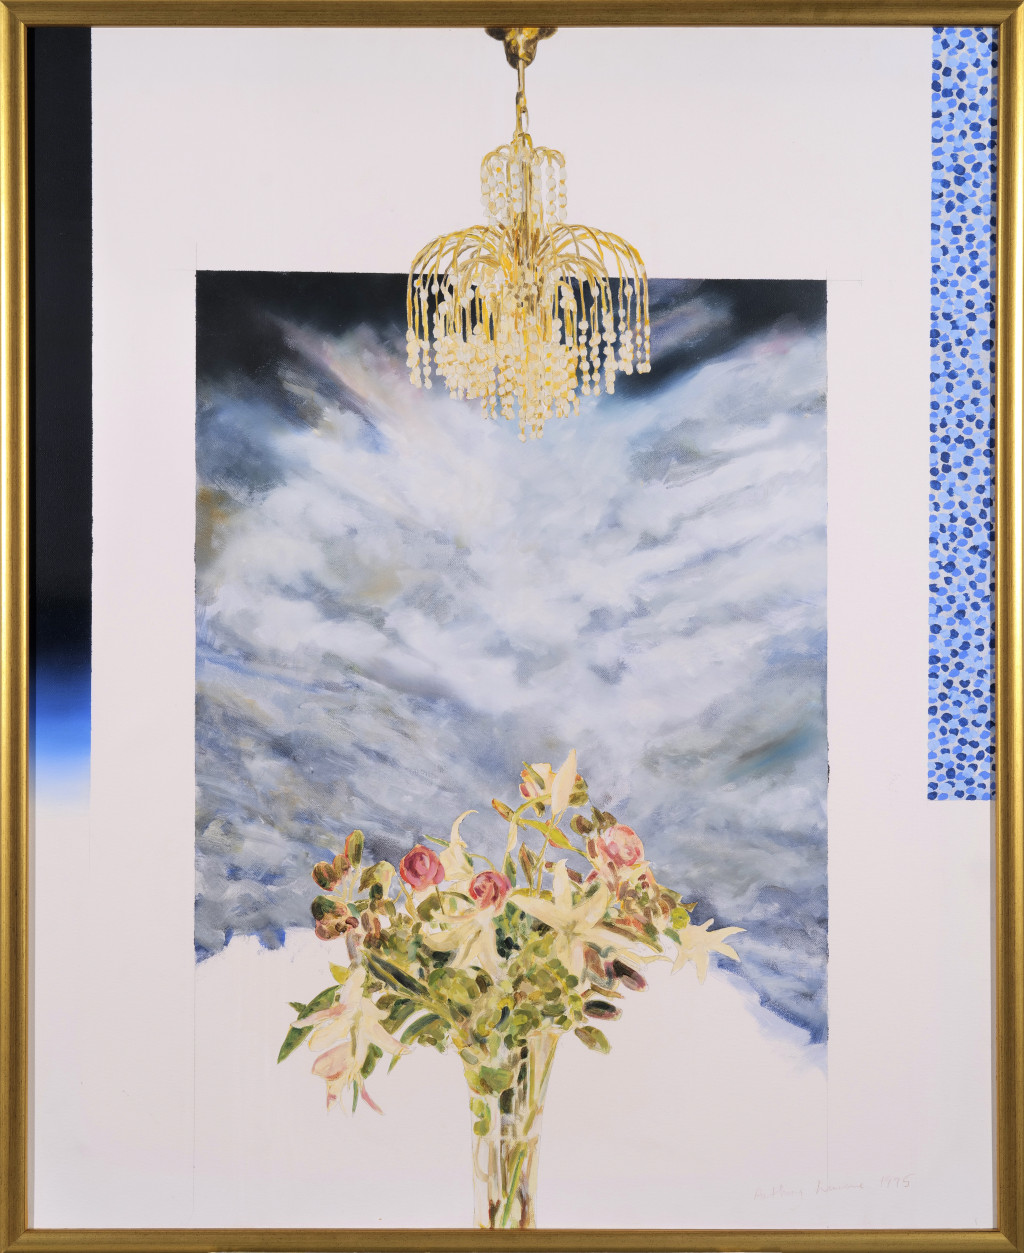 Interior with Chandelier, Flowers and Sky